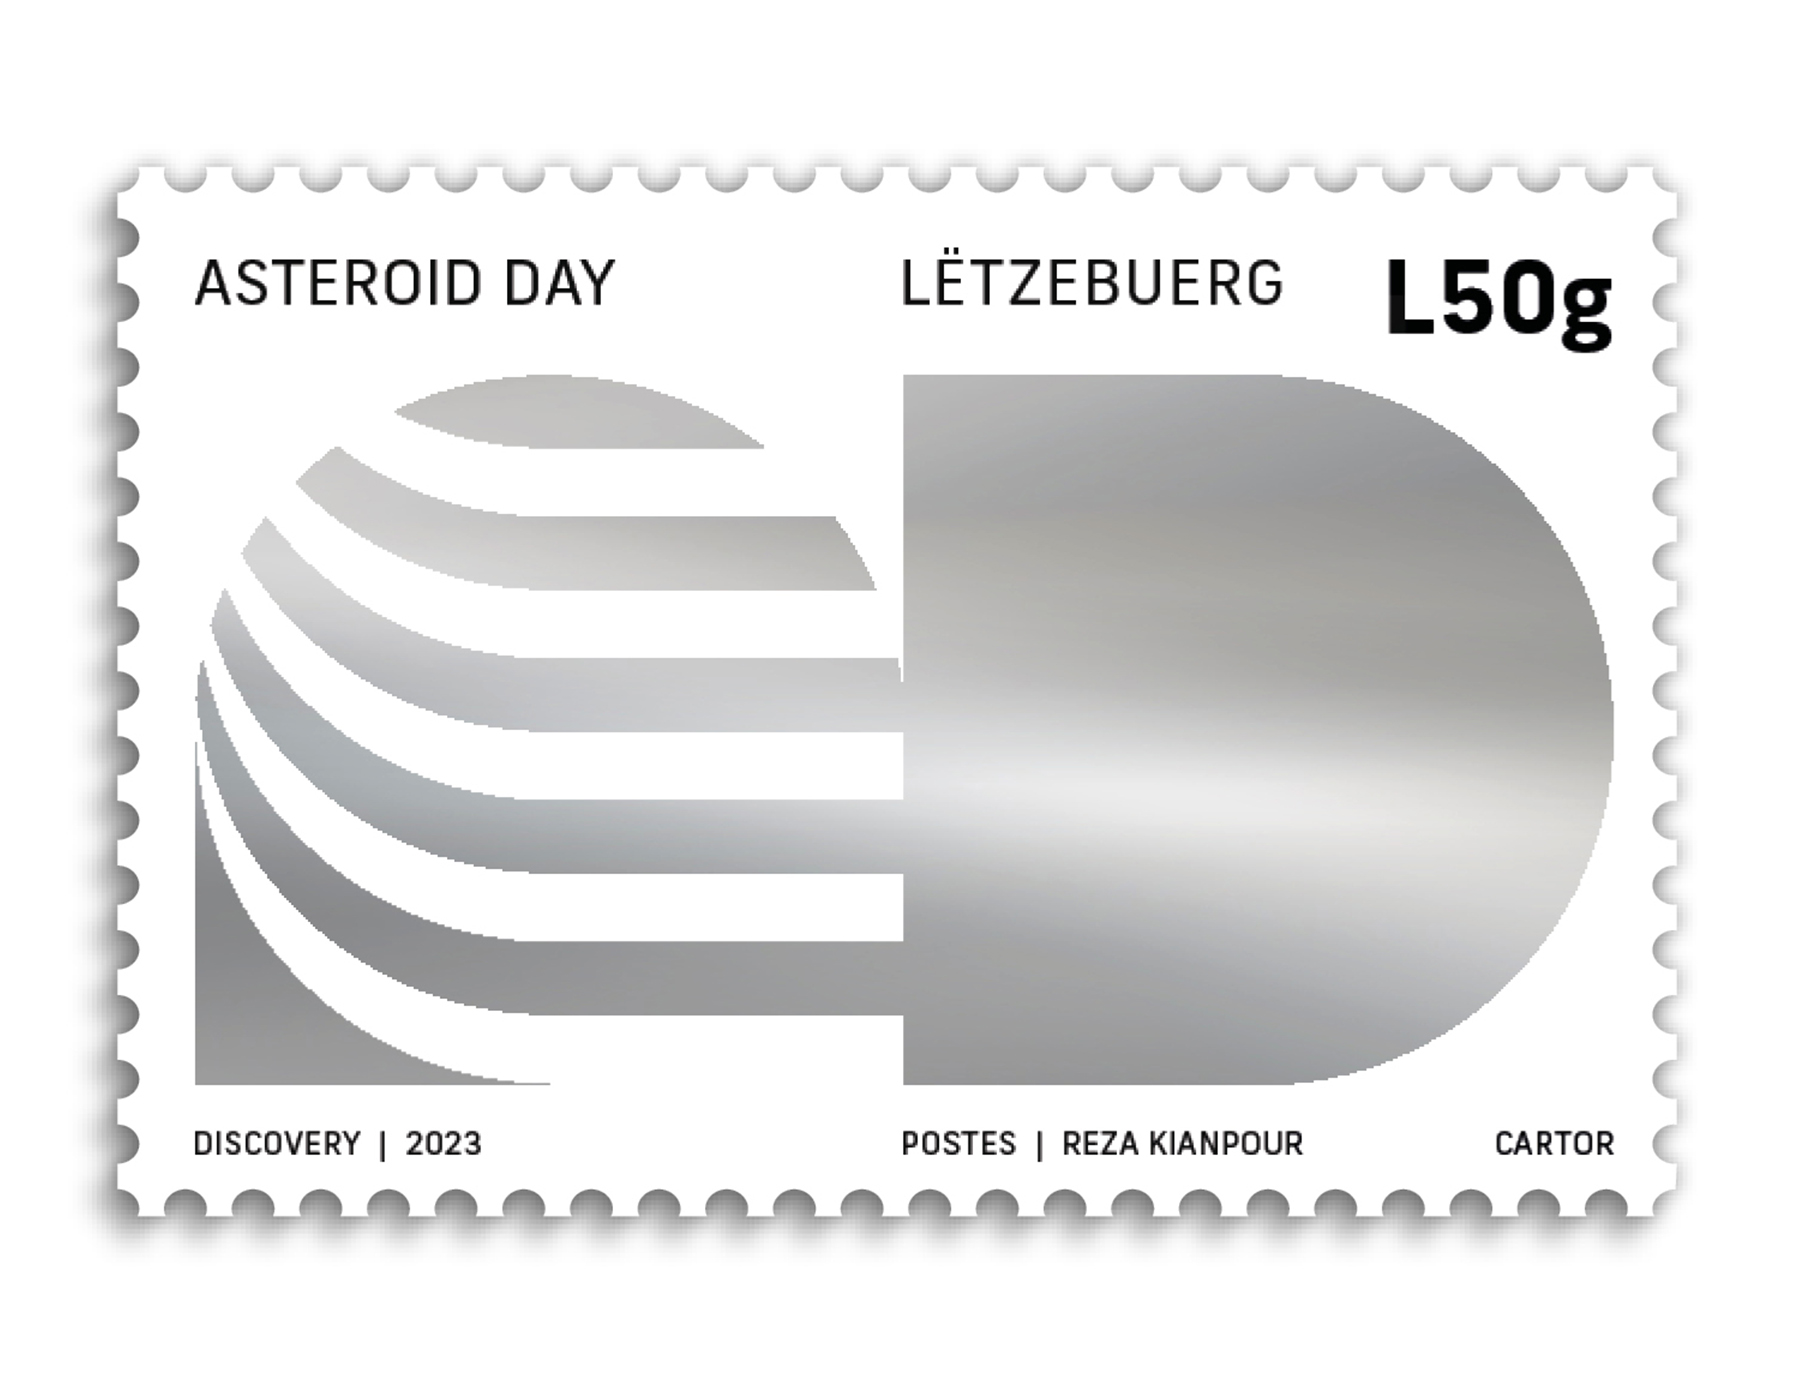 Asteroid Day - Discovery 2023